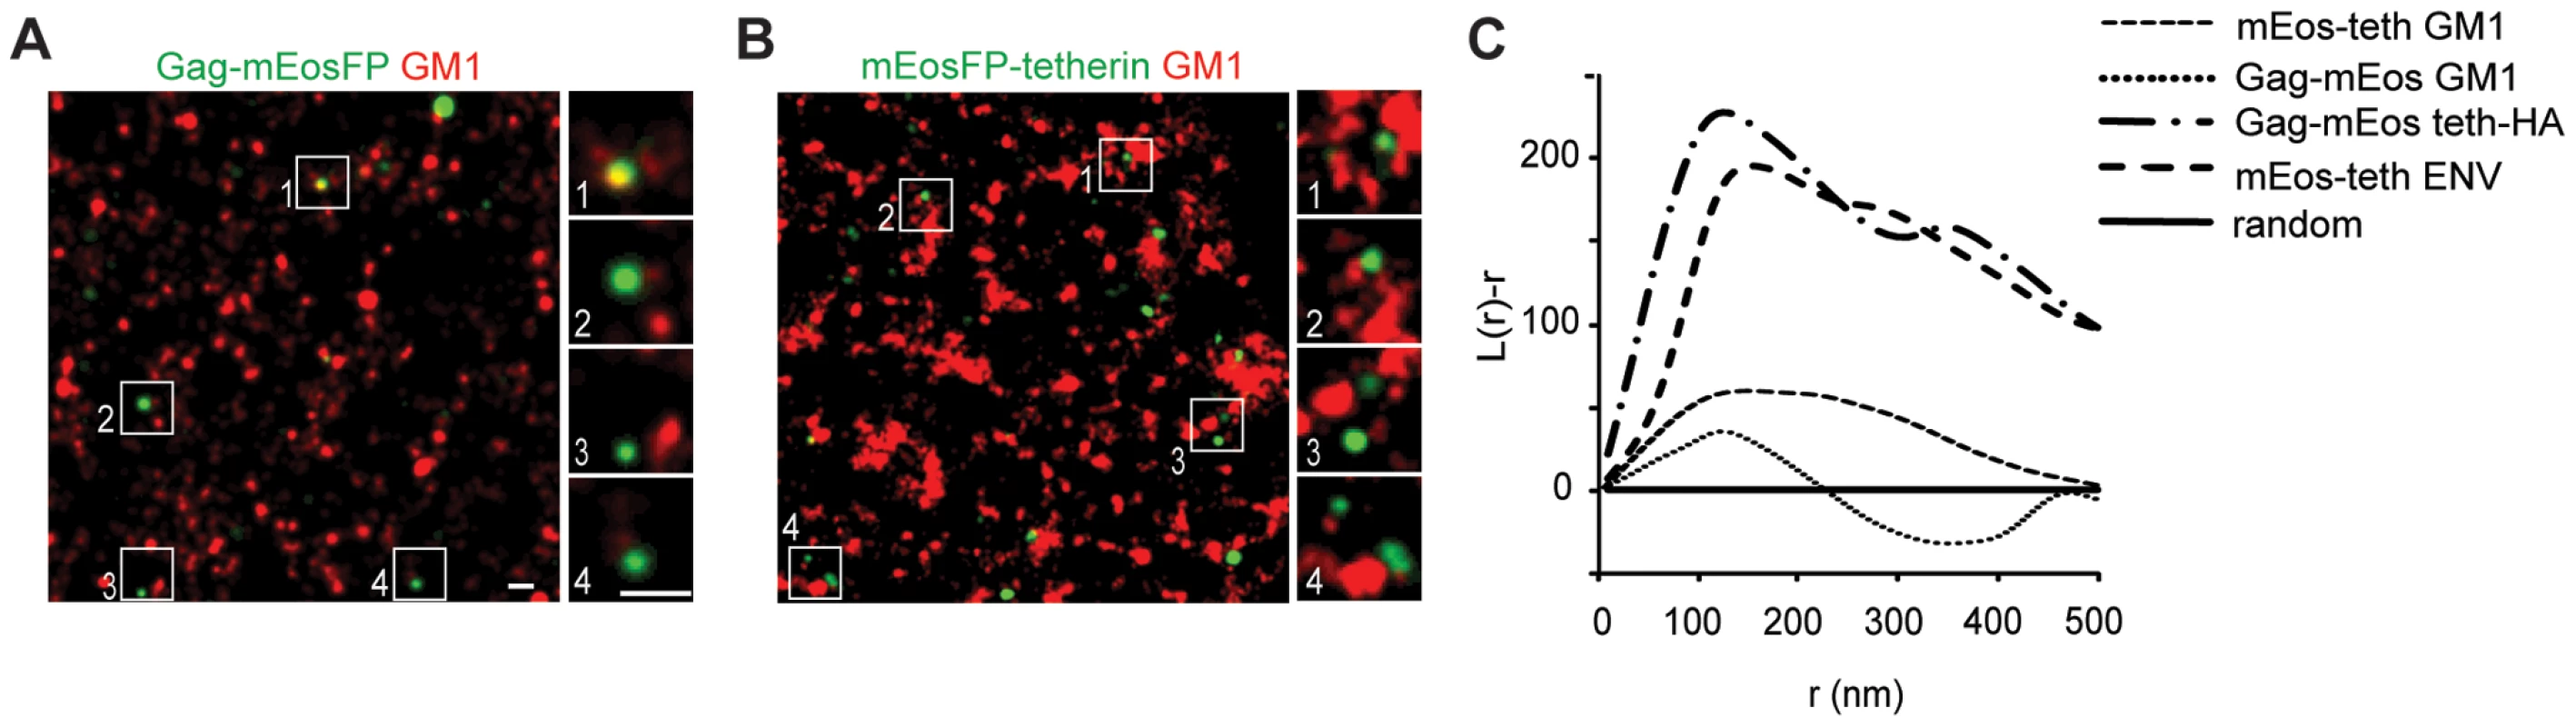 Tetherin domains and HIV-1 budding sites do not overlap with GM1 containing lipid rafts.